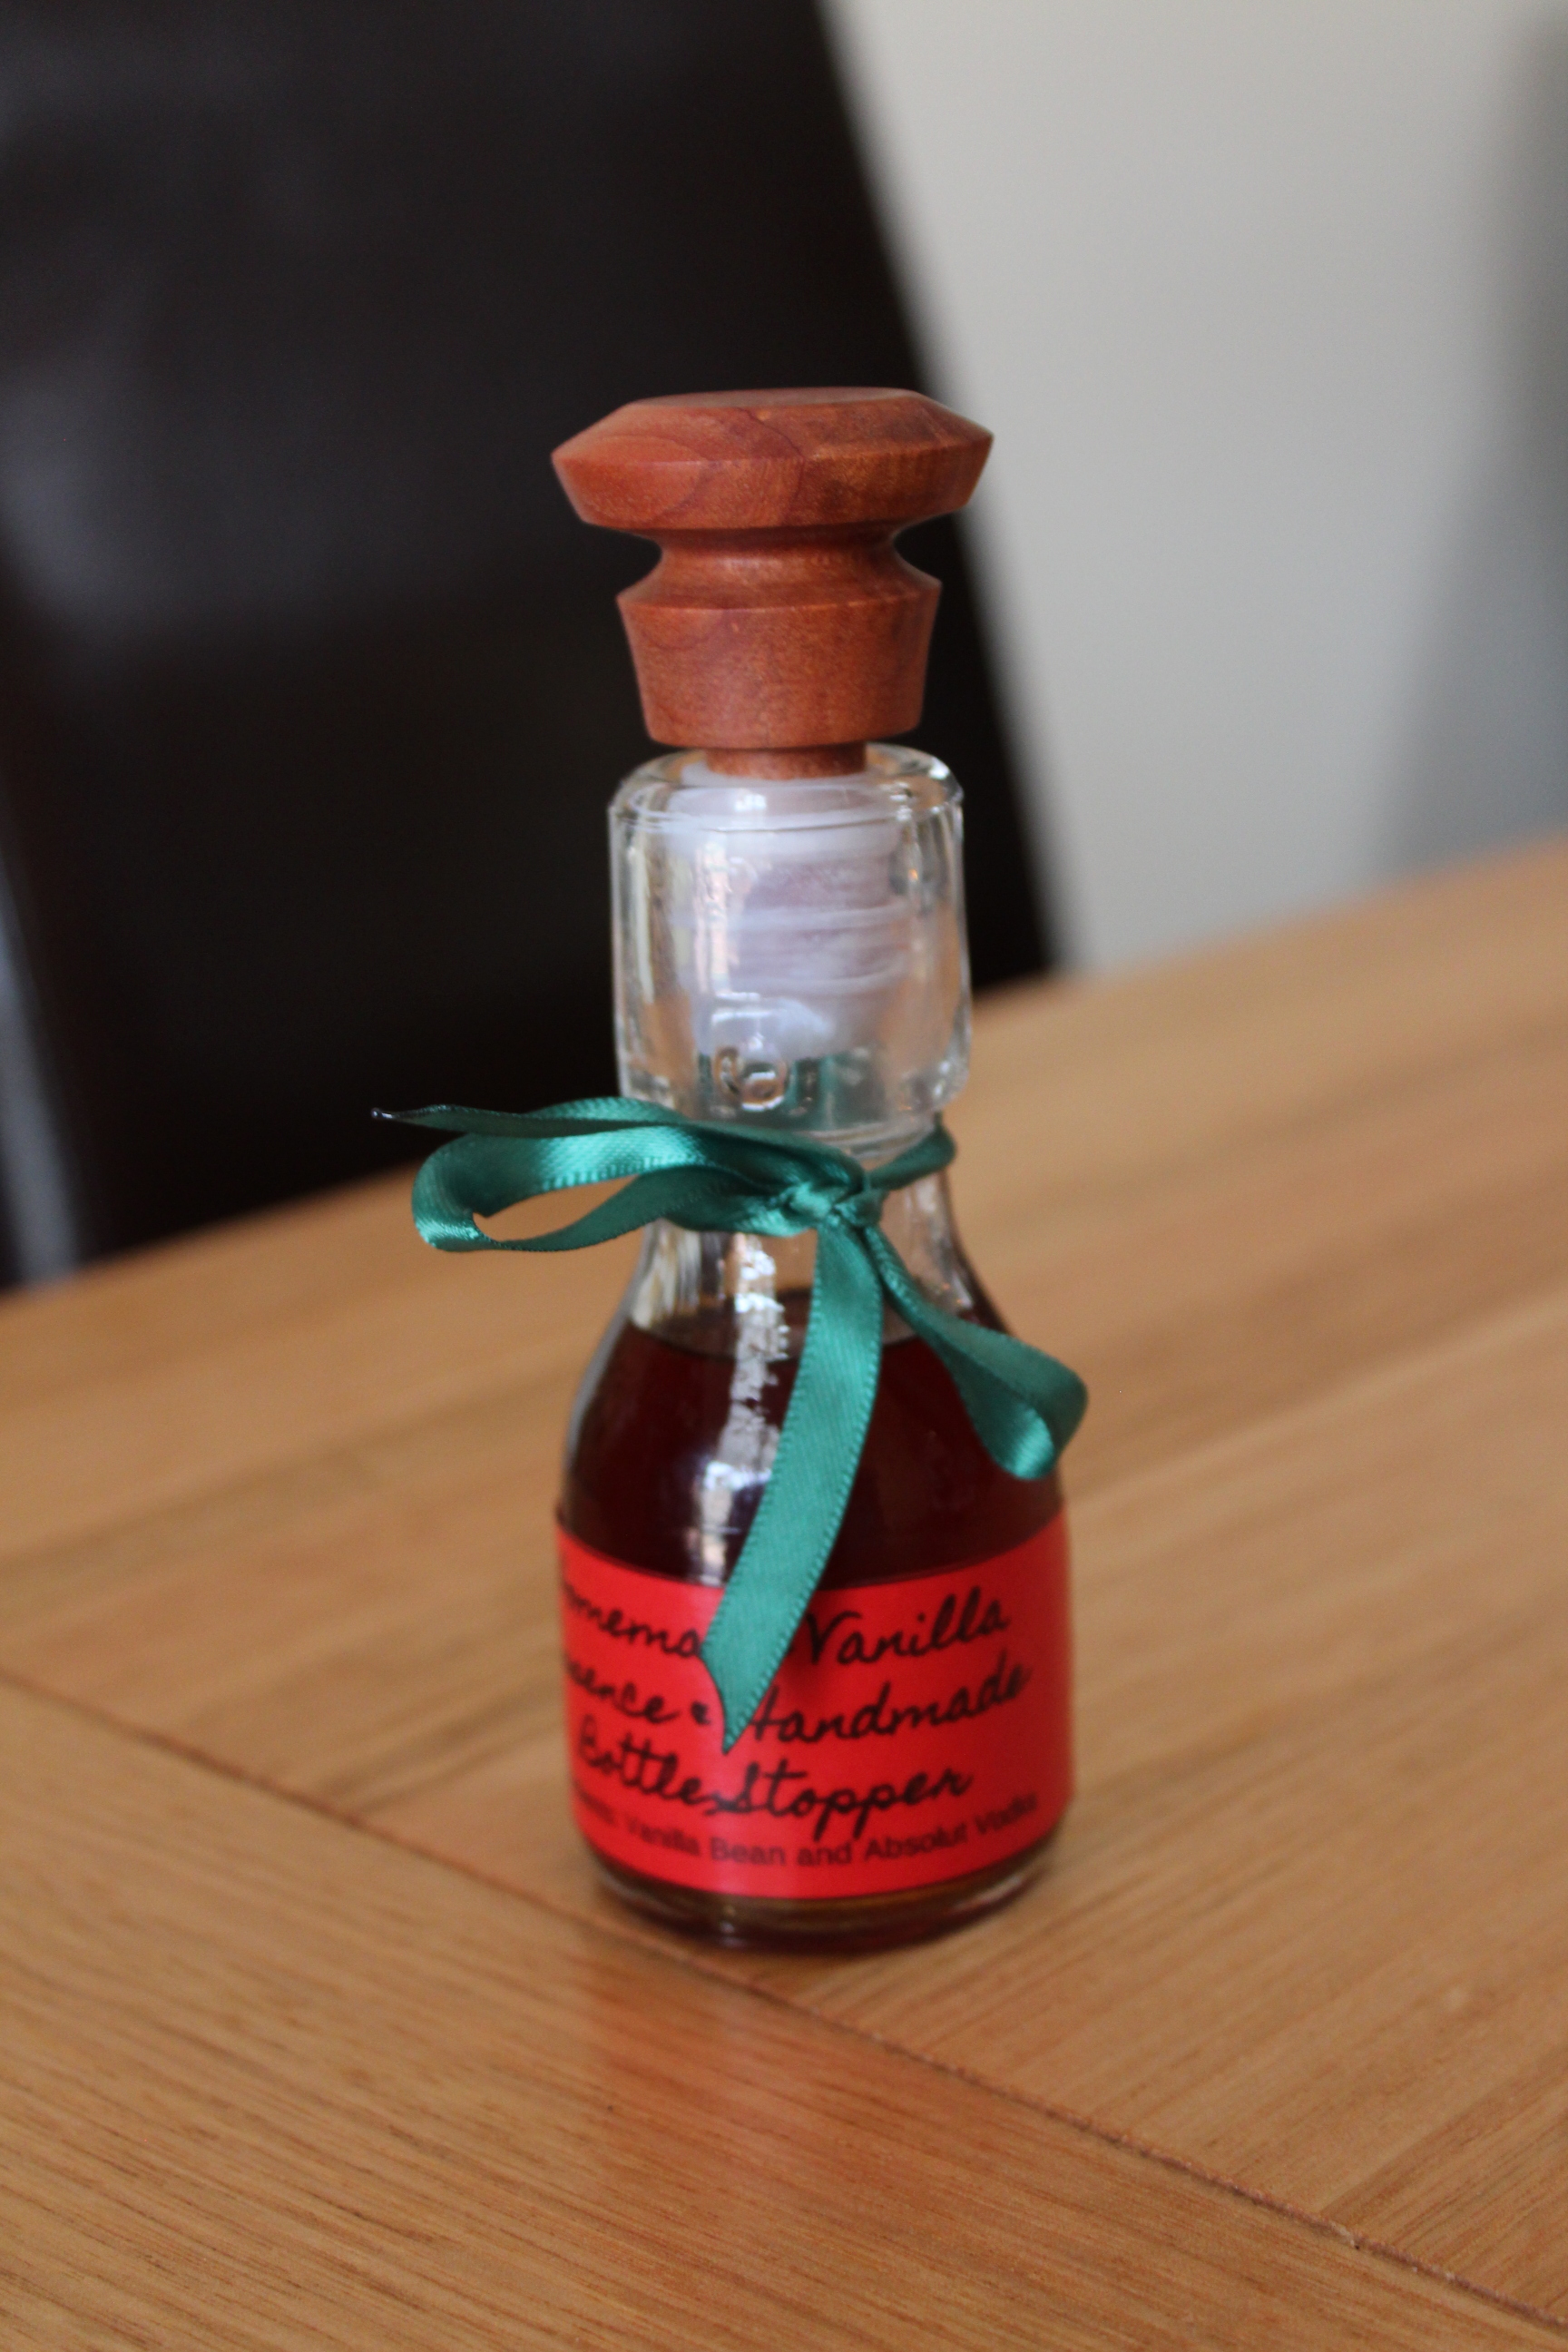 Our finished home made Christmas vanilla essence with turned stopper.